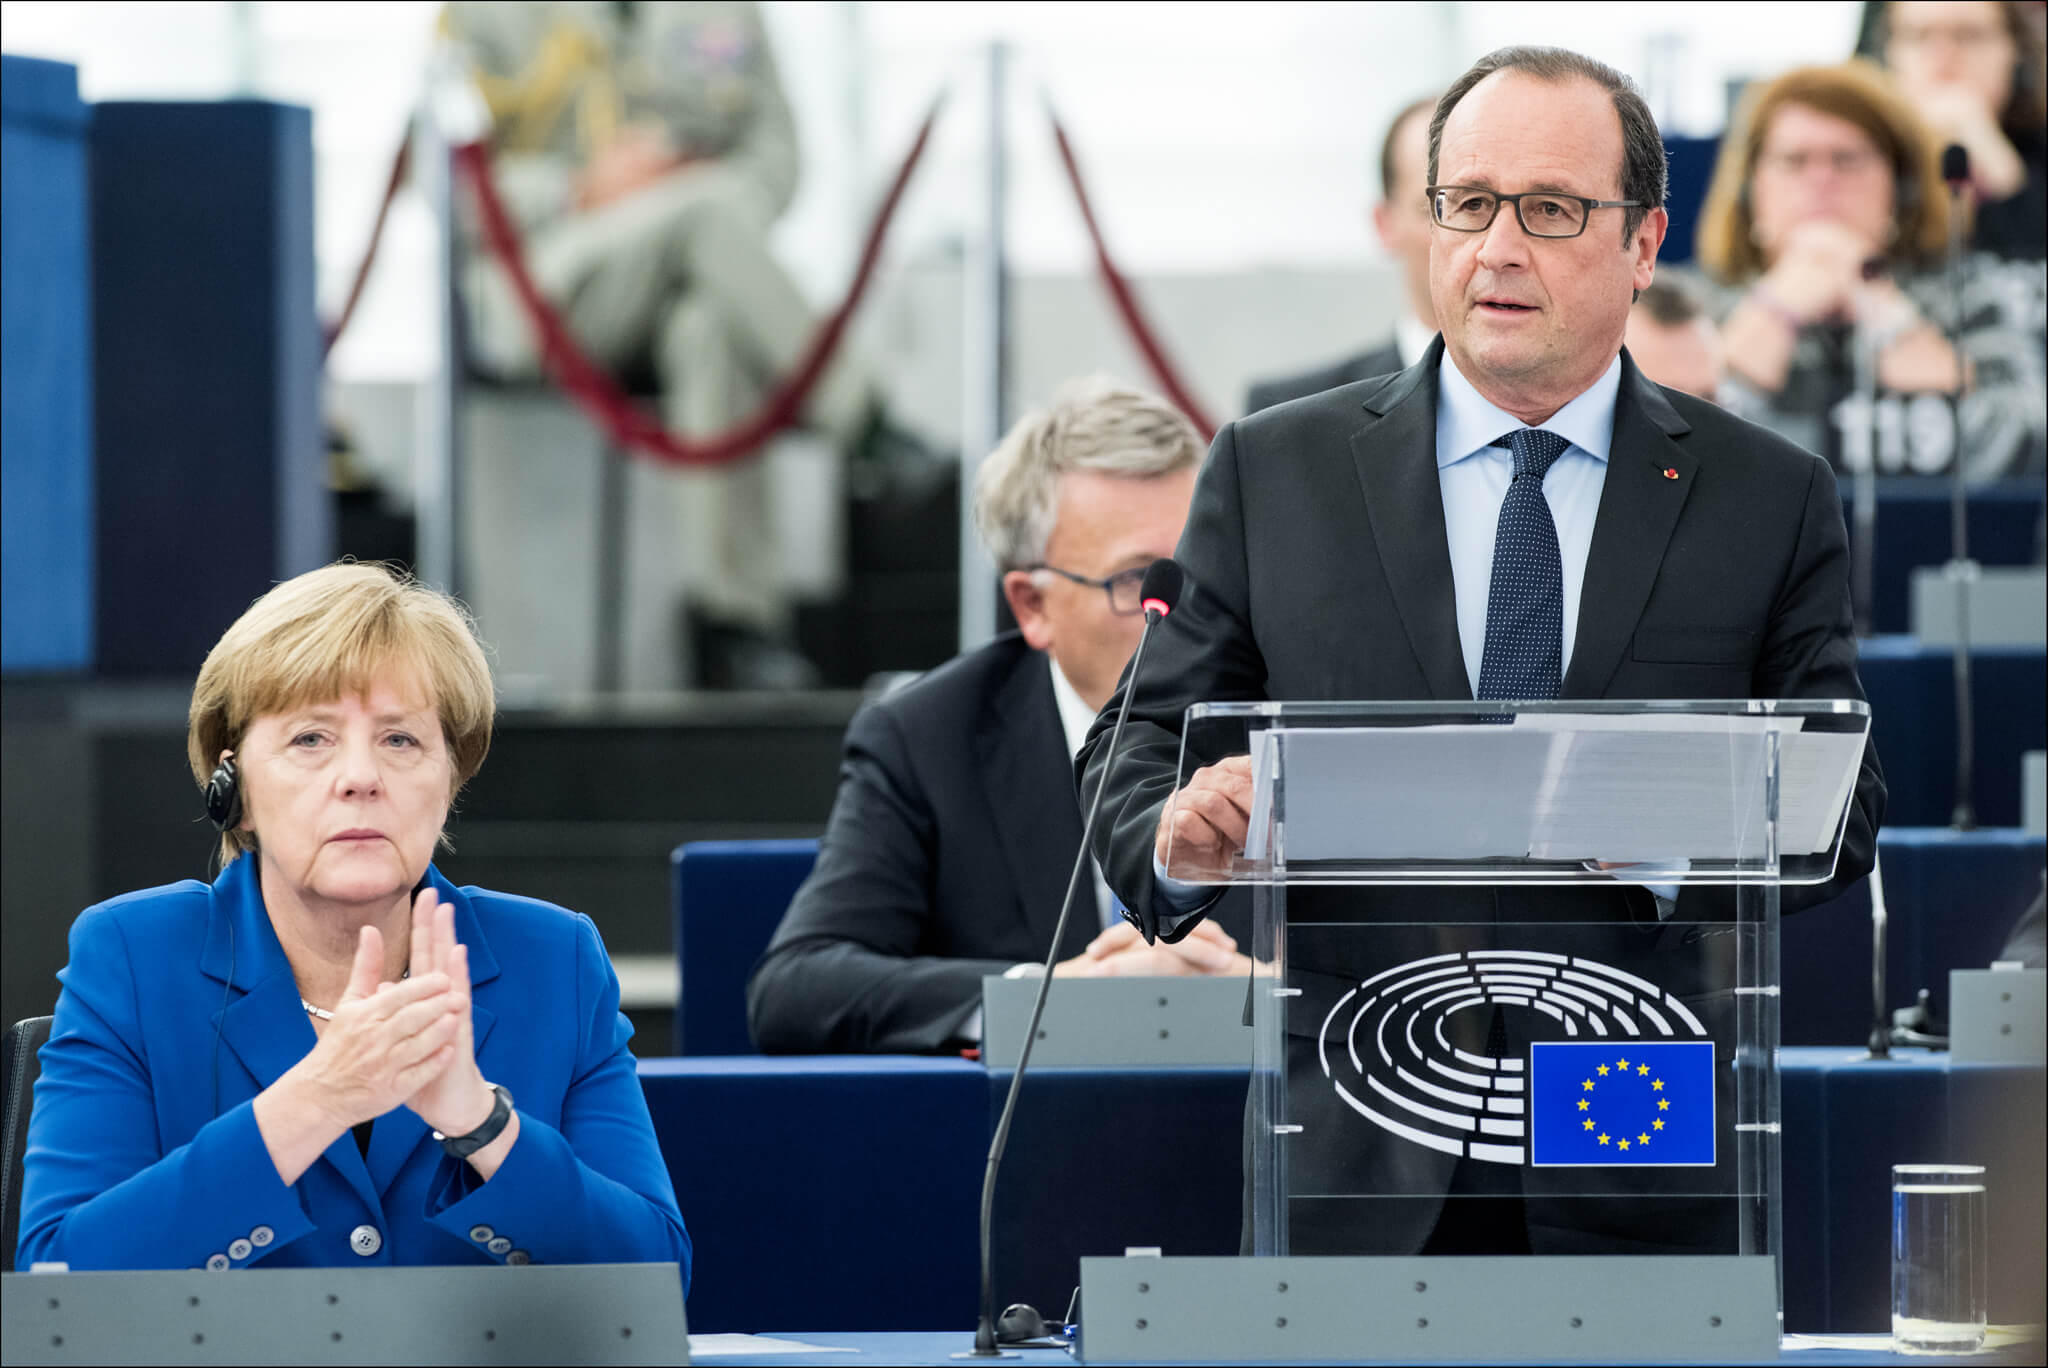 Hollande and Merkel in the plenary chamber for an historic debate with MEPs in 2015. European Parliament